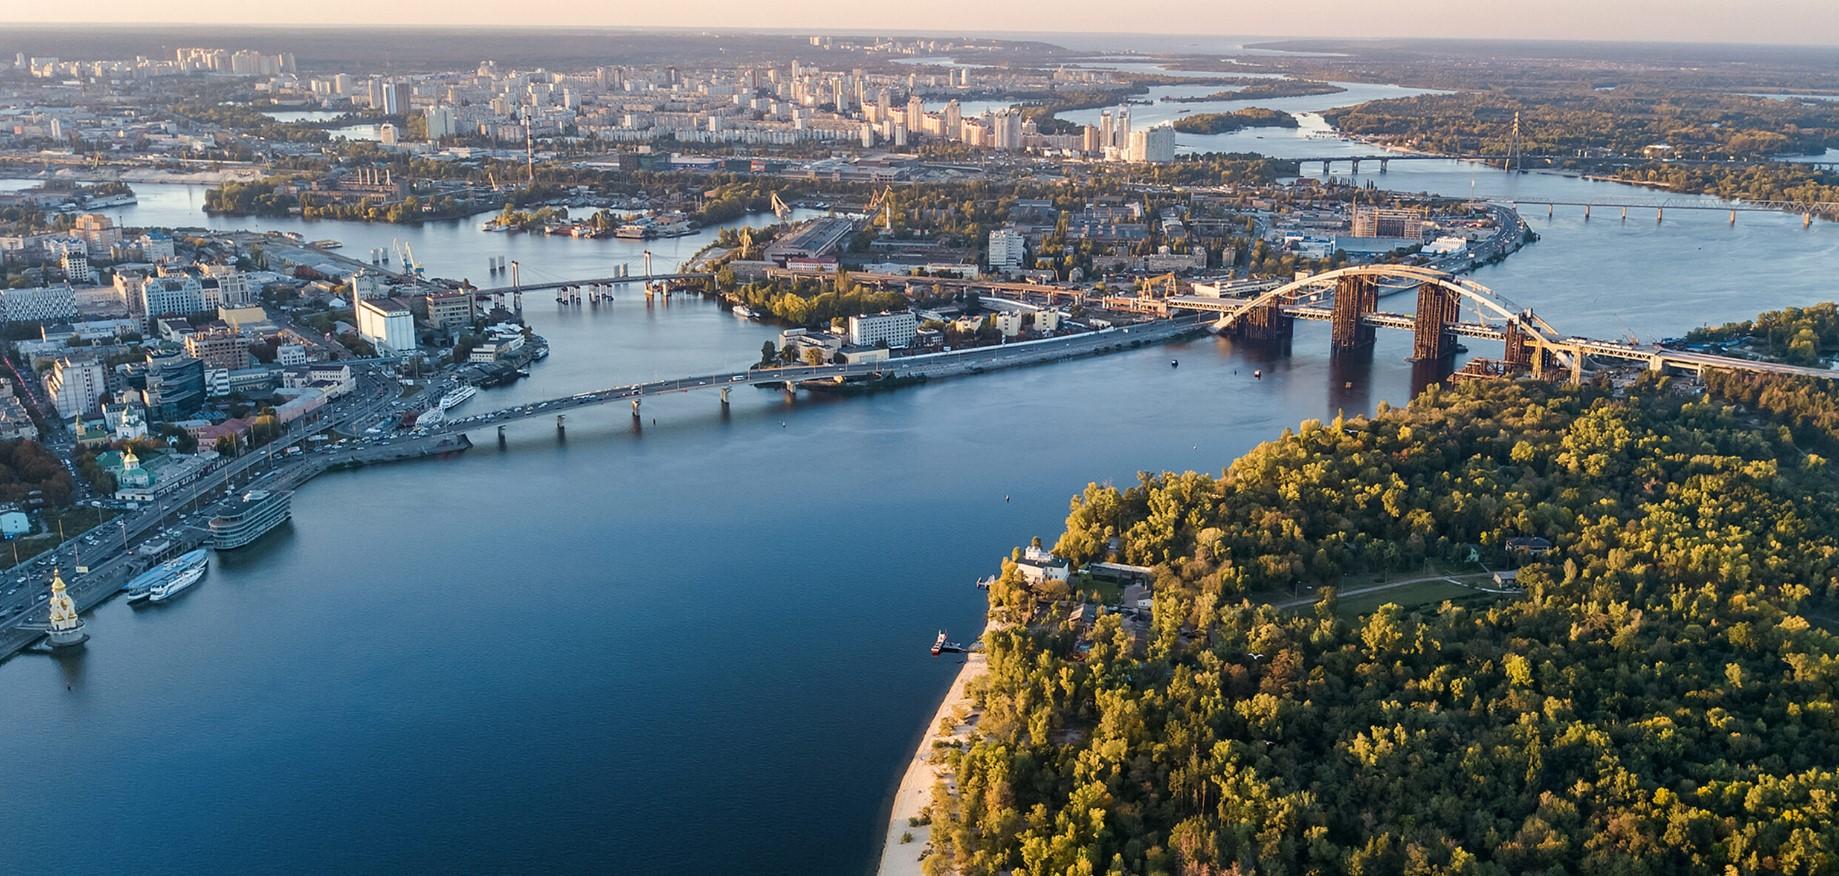 Kyiv was recognized as the best city in the world in 2023